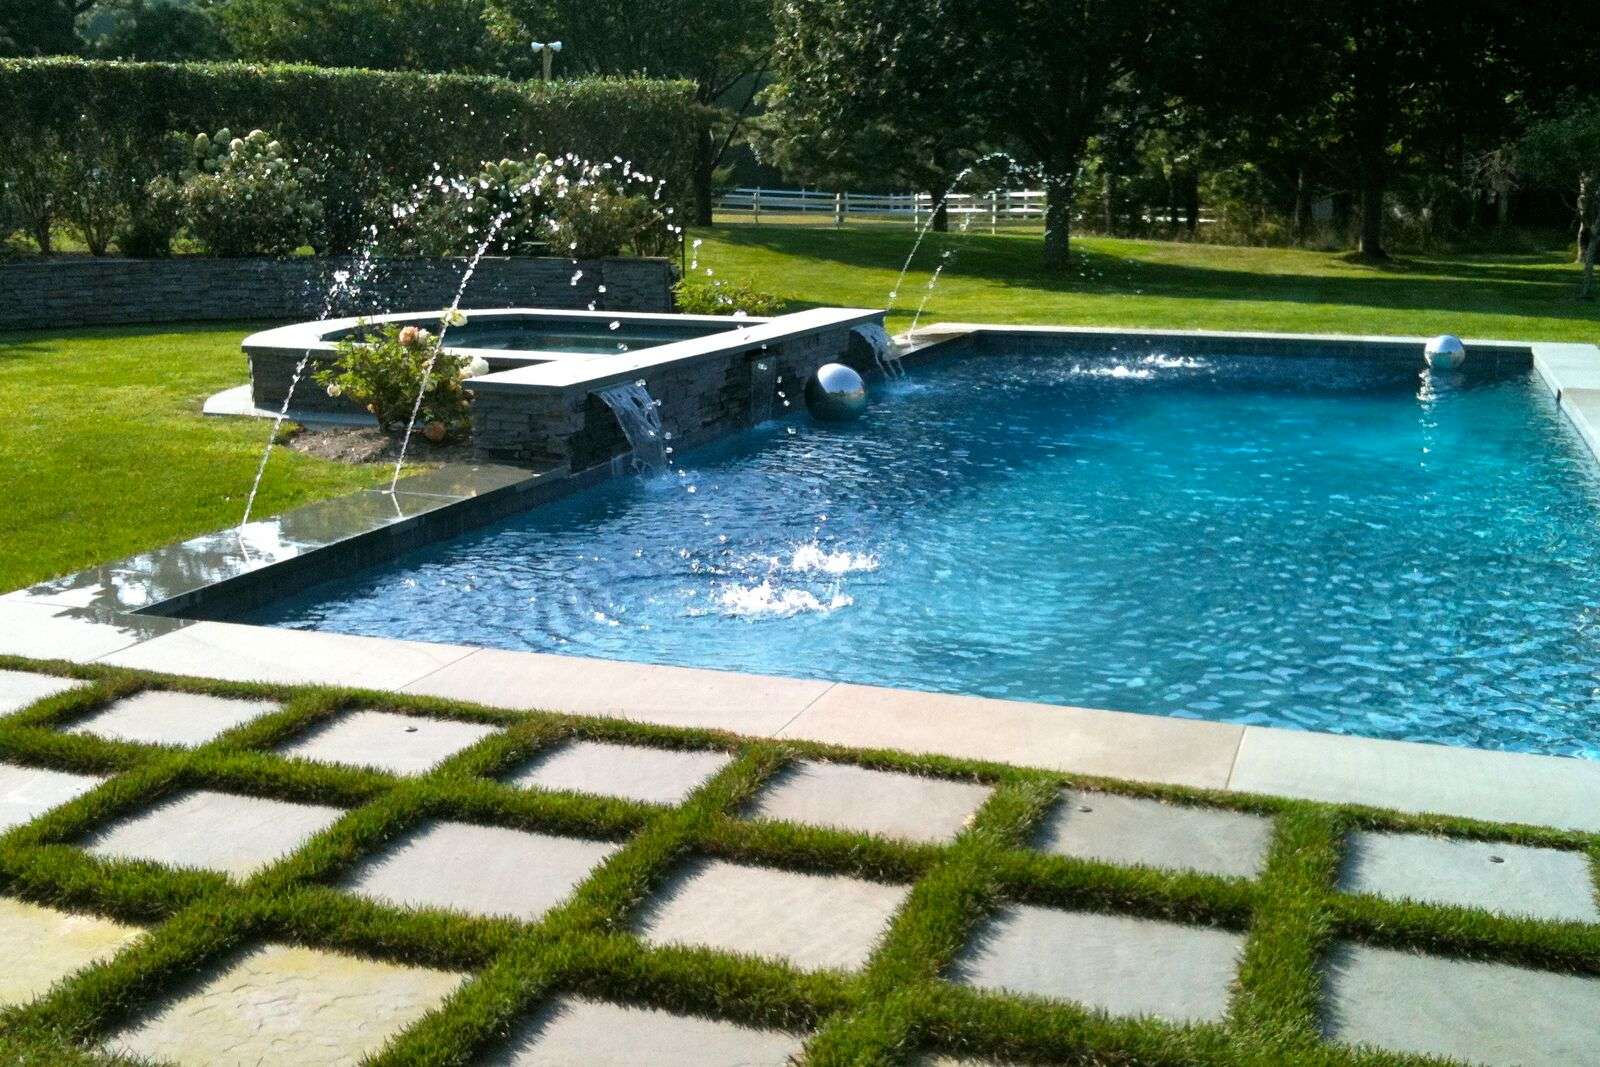 How Much Does an Inground Swimming Pool Cost?